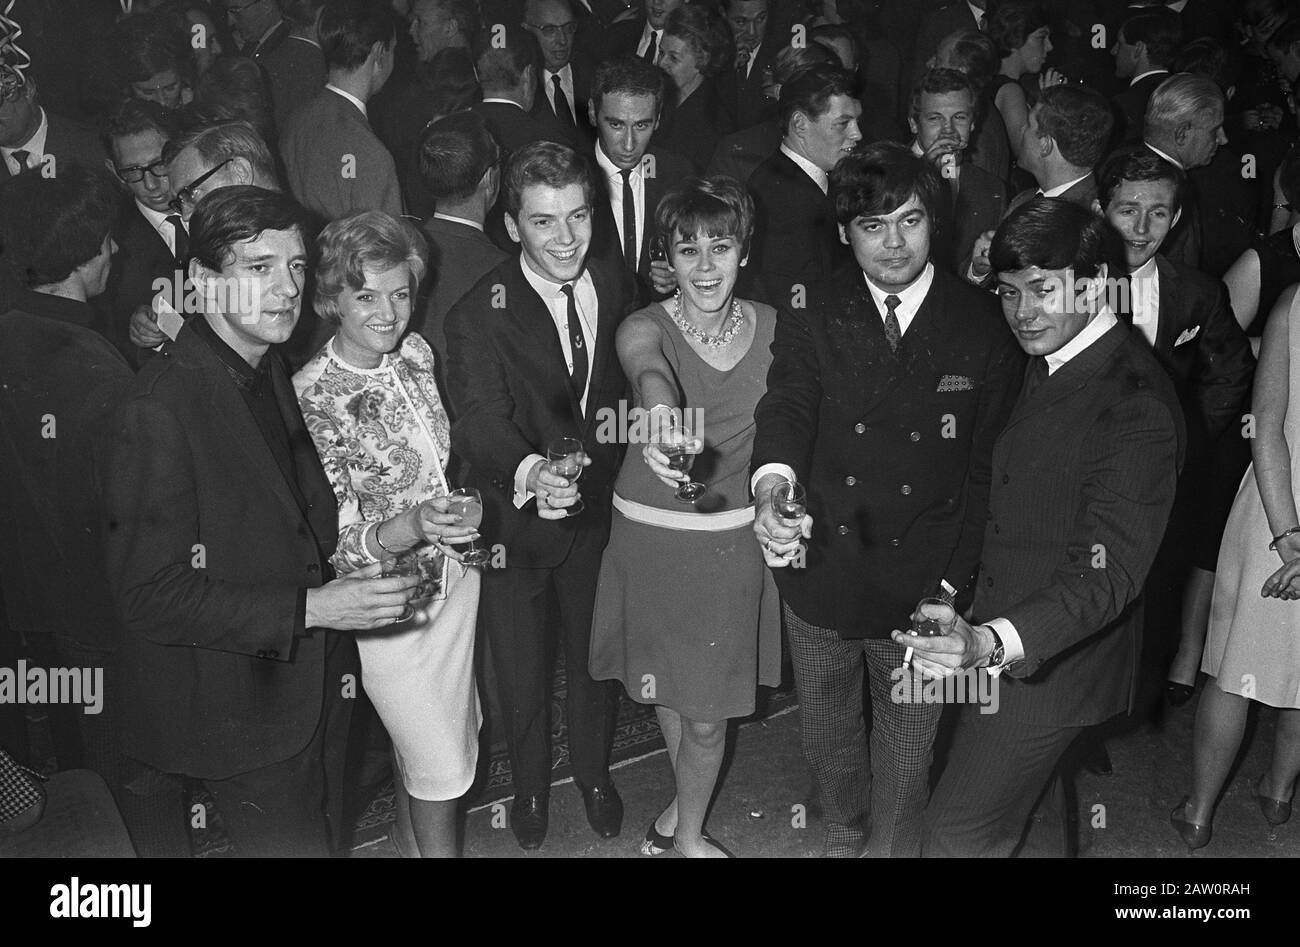 New Year's reception of Phonogram Hilversum, v.l.n.r. Williams Vanessa, Mieke Telkamp, Ronnie Tober, Connie Vandenbos and Johnny Lion and Rob de Nijs Date: January 3, 1966 Location: Hilversum, Noord-Holland Keywords: artists, records companies, music, receptions, singers, singers Person Name: Lion, Johnny, Shaffy Ramses, Telkamp, Mieke, Tober, Ronnie, Vandenbos, Connie Institution Name: Phonogram Stock Photo